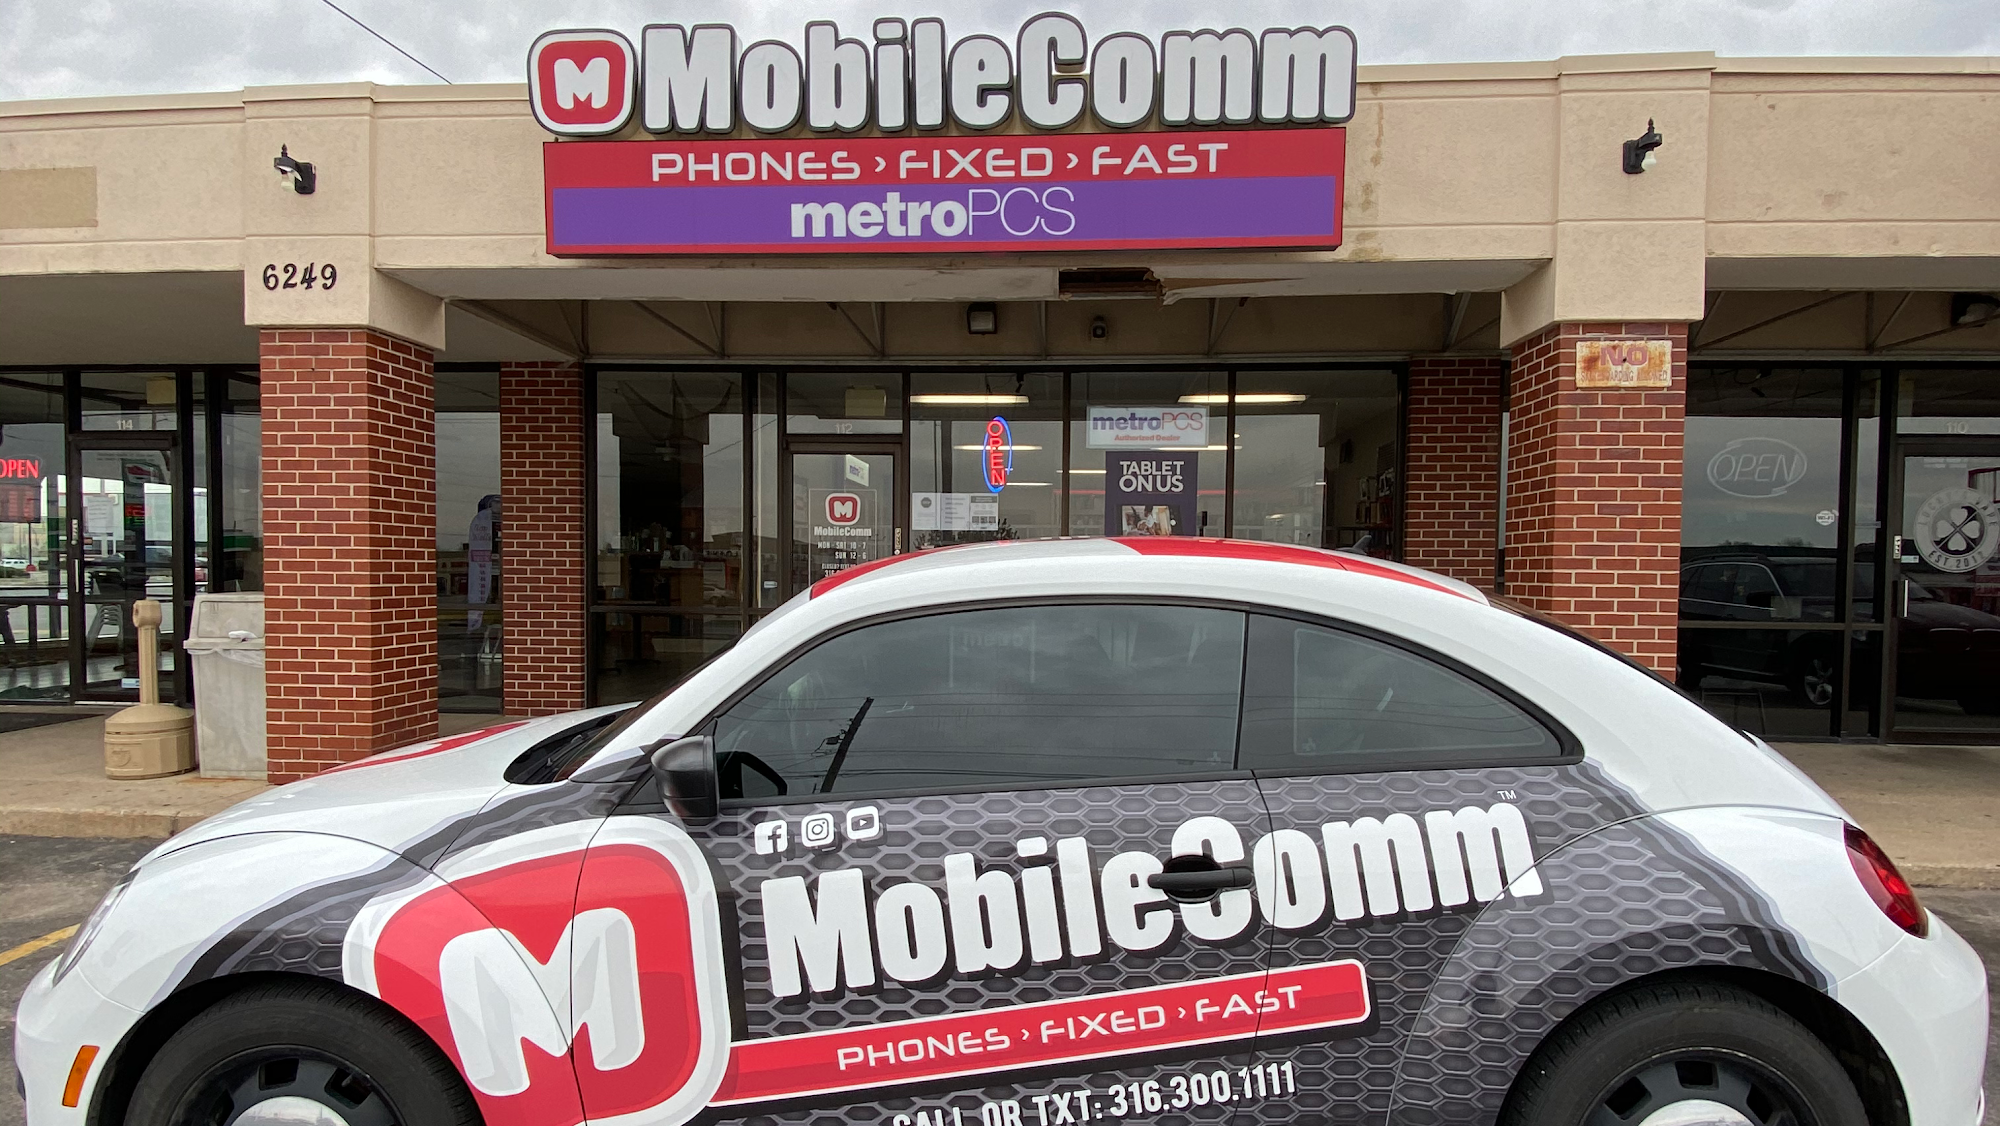 MobileComm - Phones Fixed Fast (21st & Woodlawn)